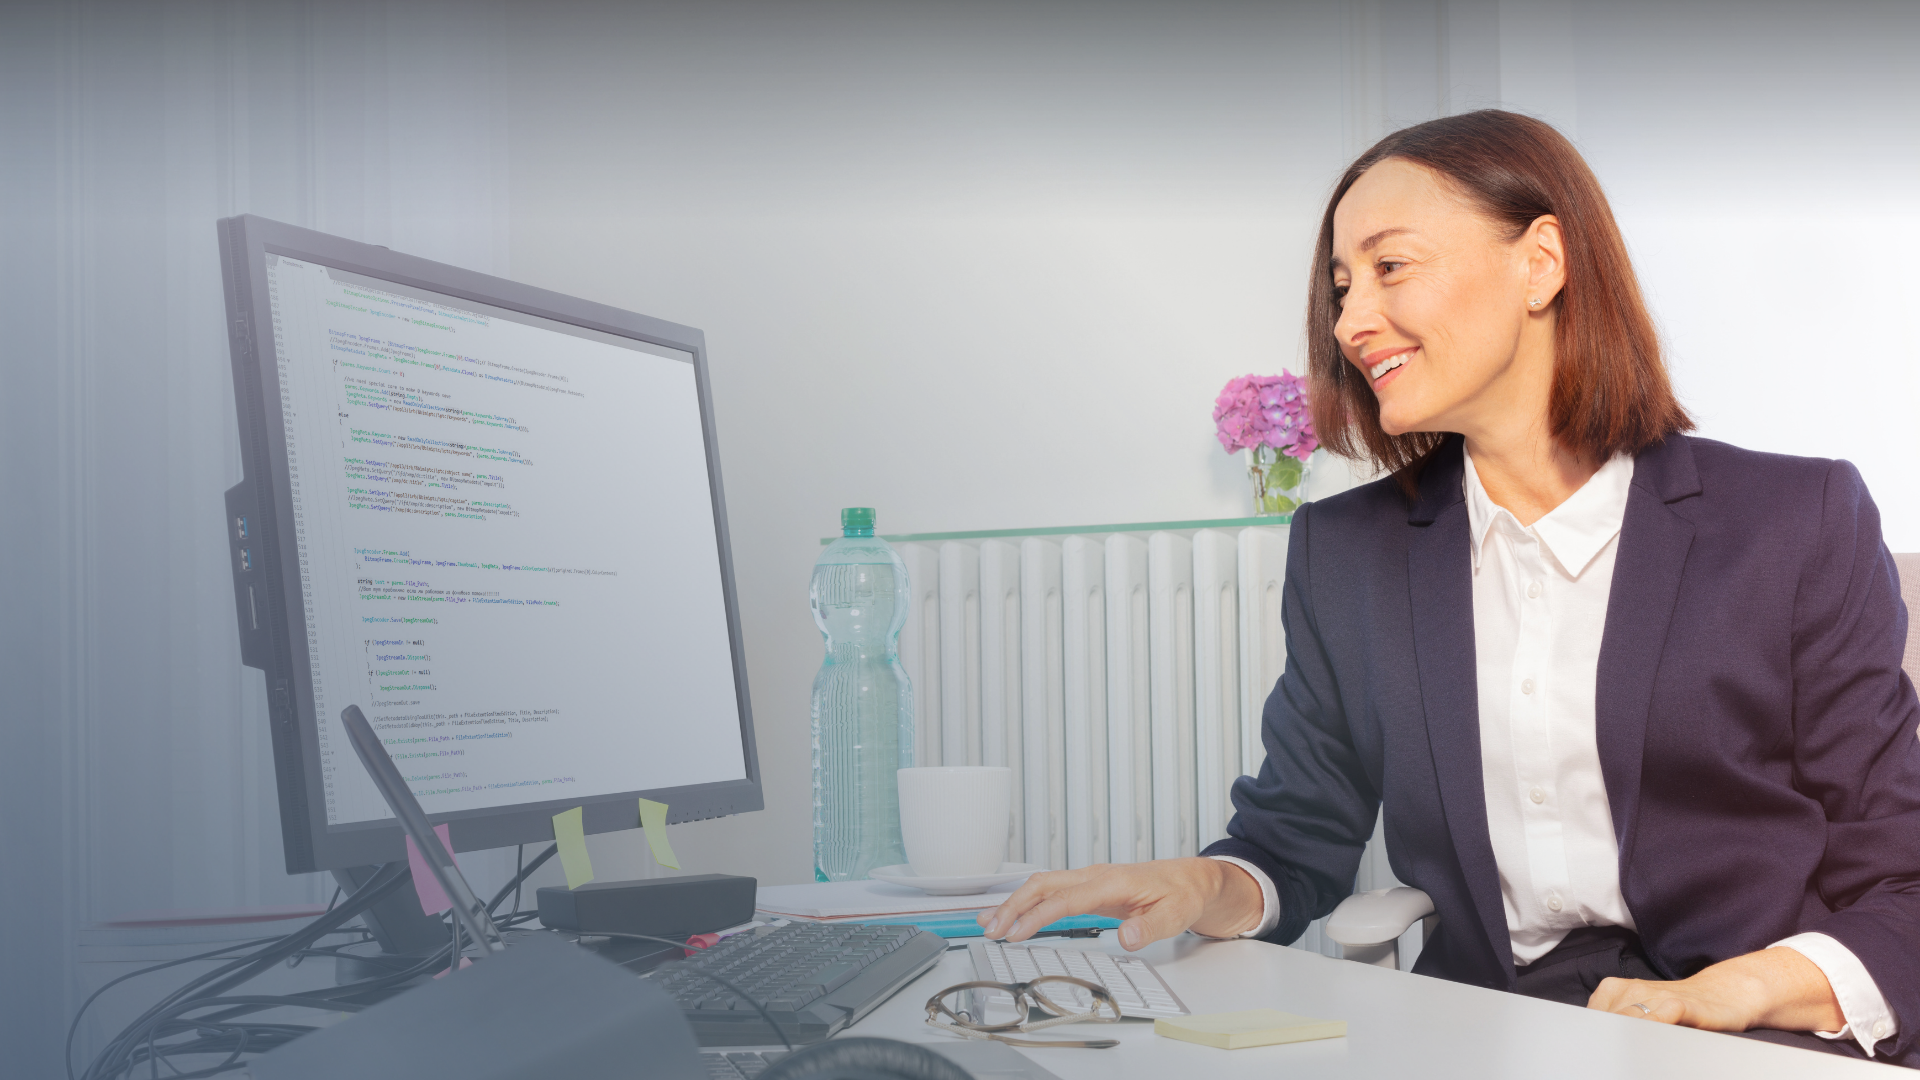 Business woman smiling and looking at code on her monitor